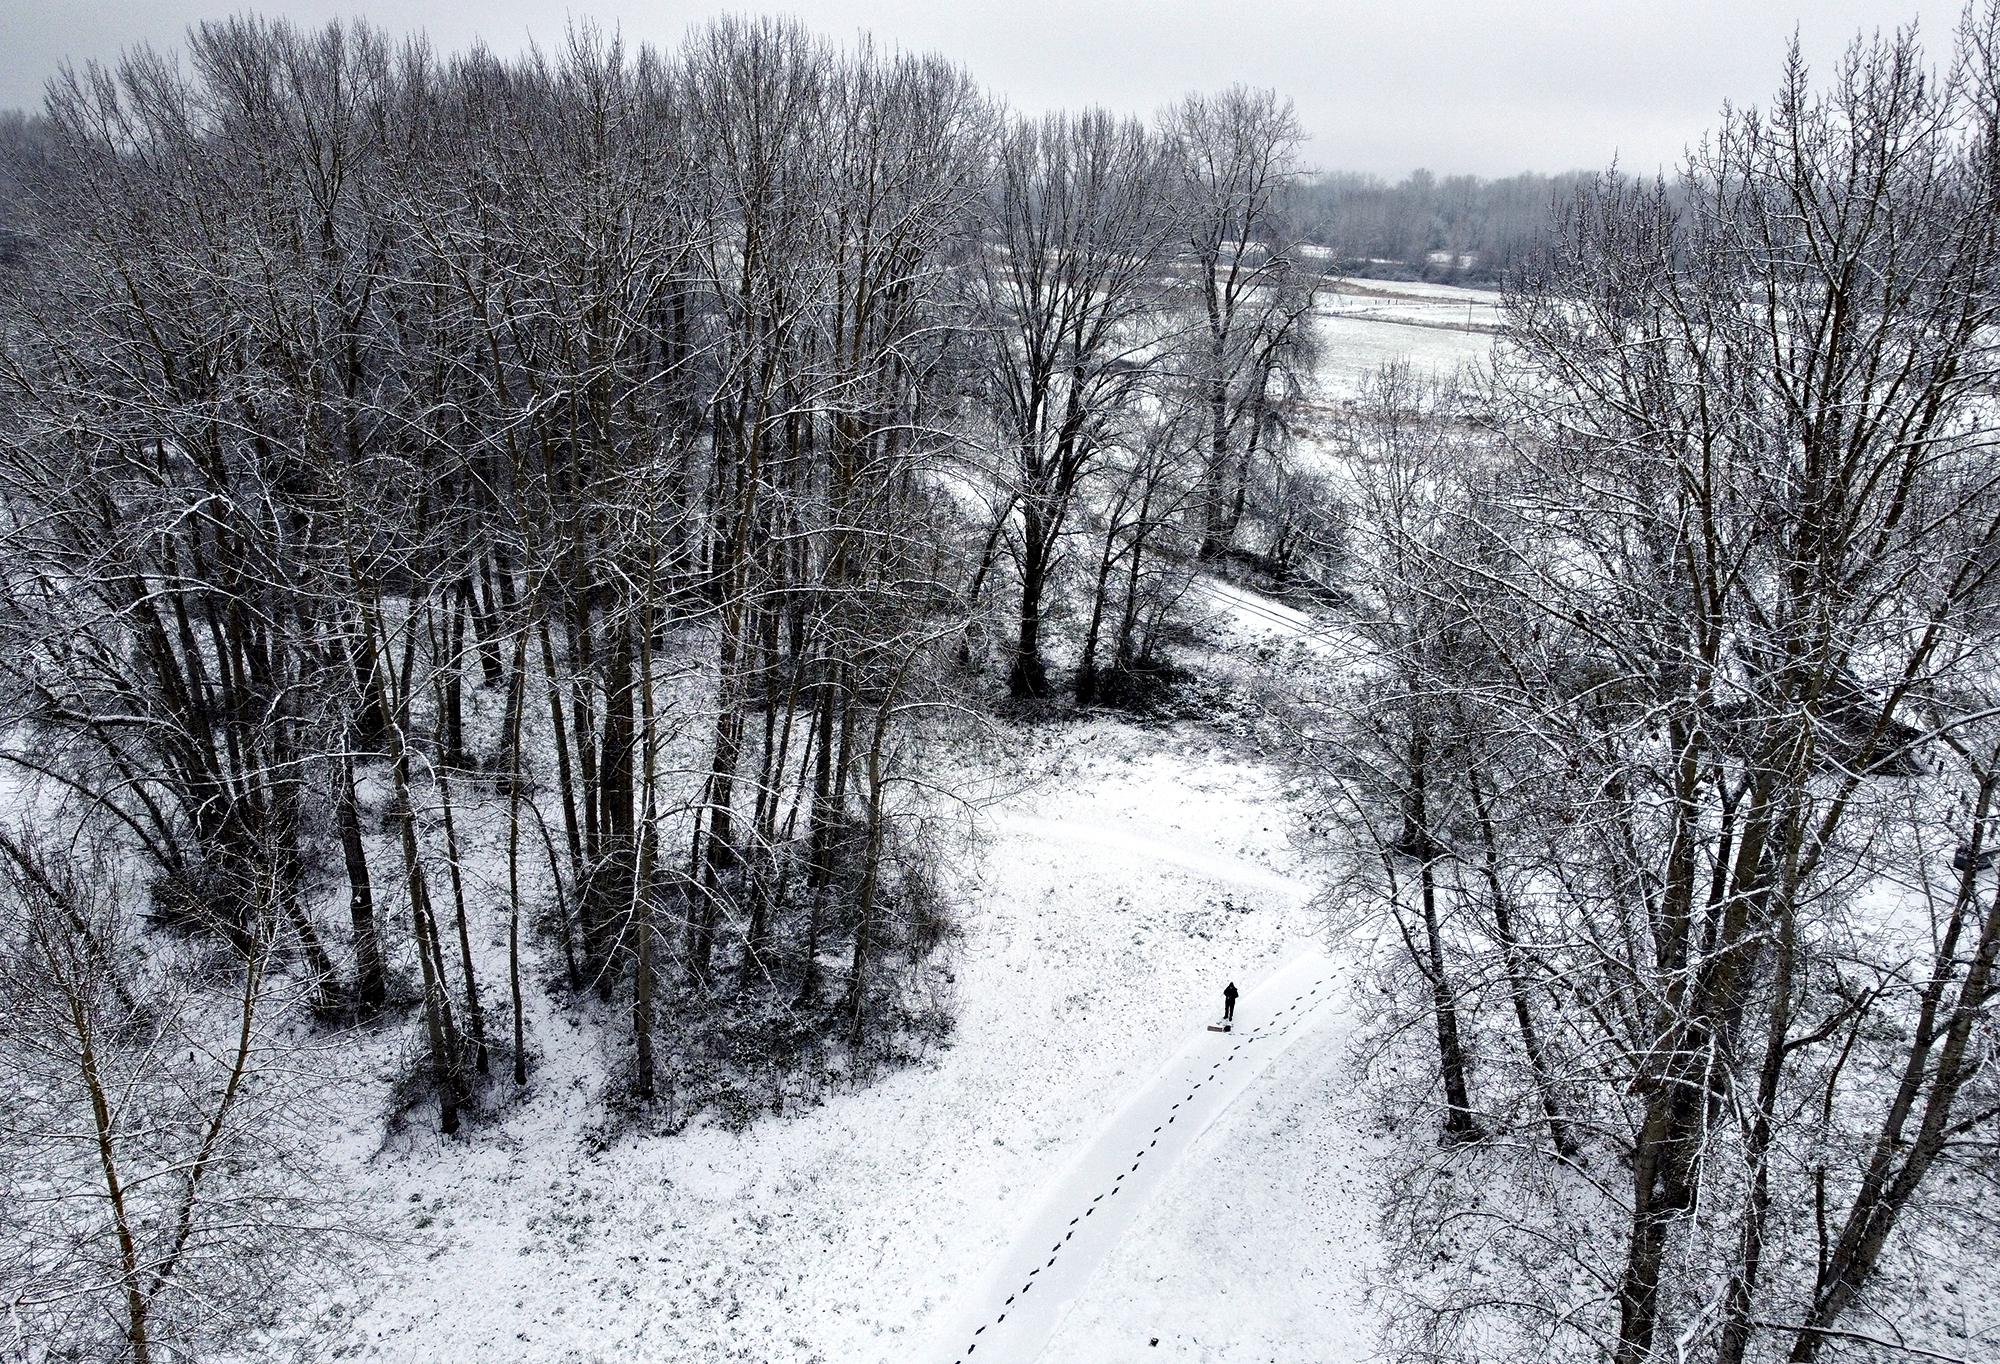 Another round of snow before thaw comes to frigid Northwest – Associated Press